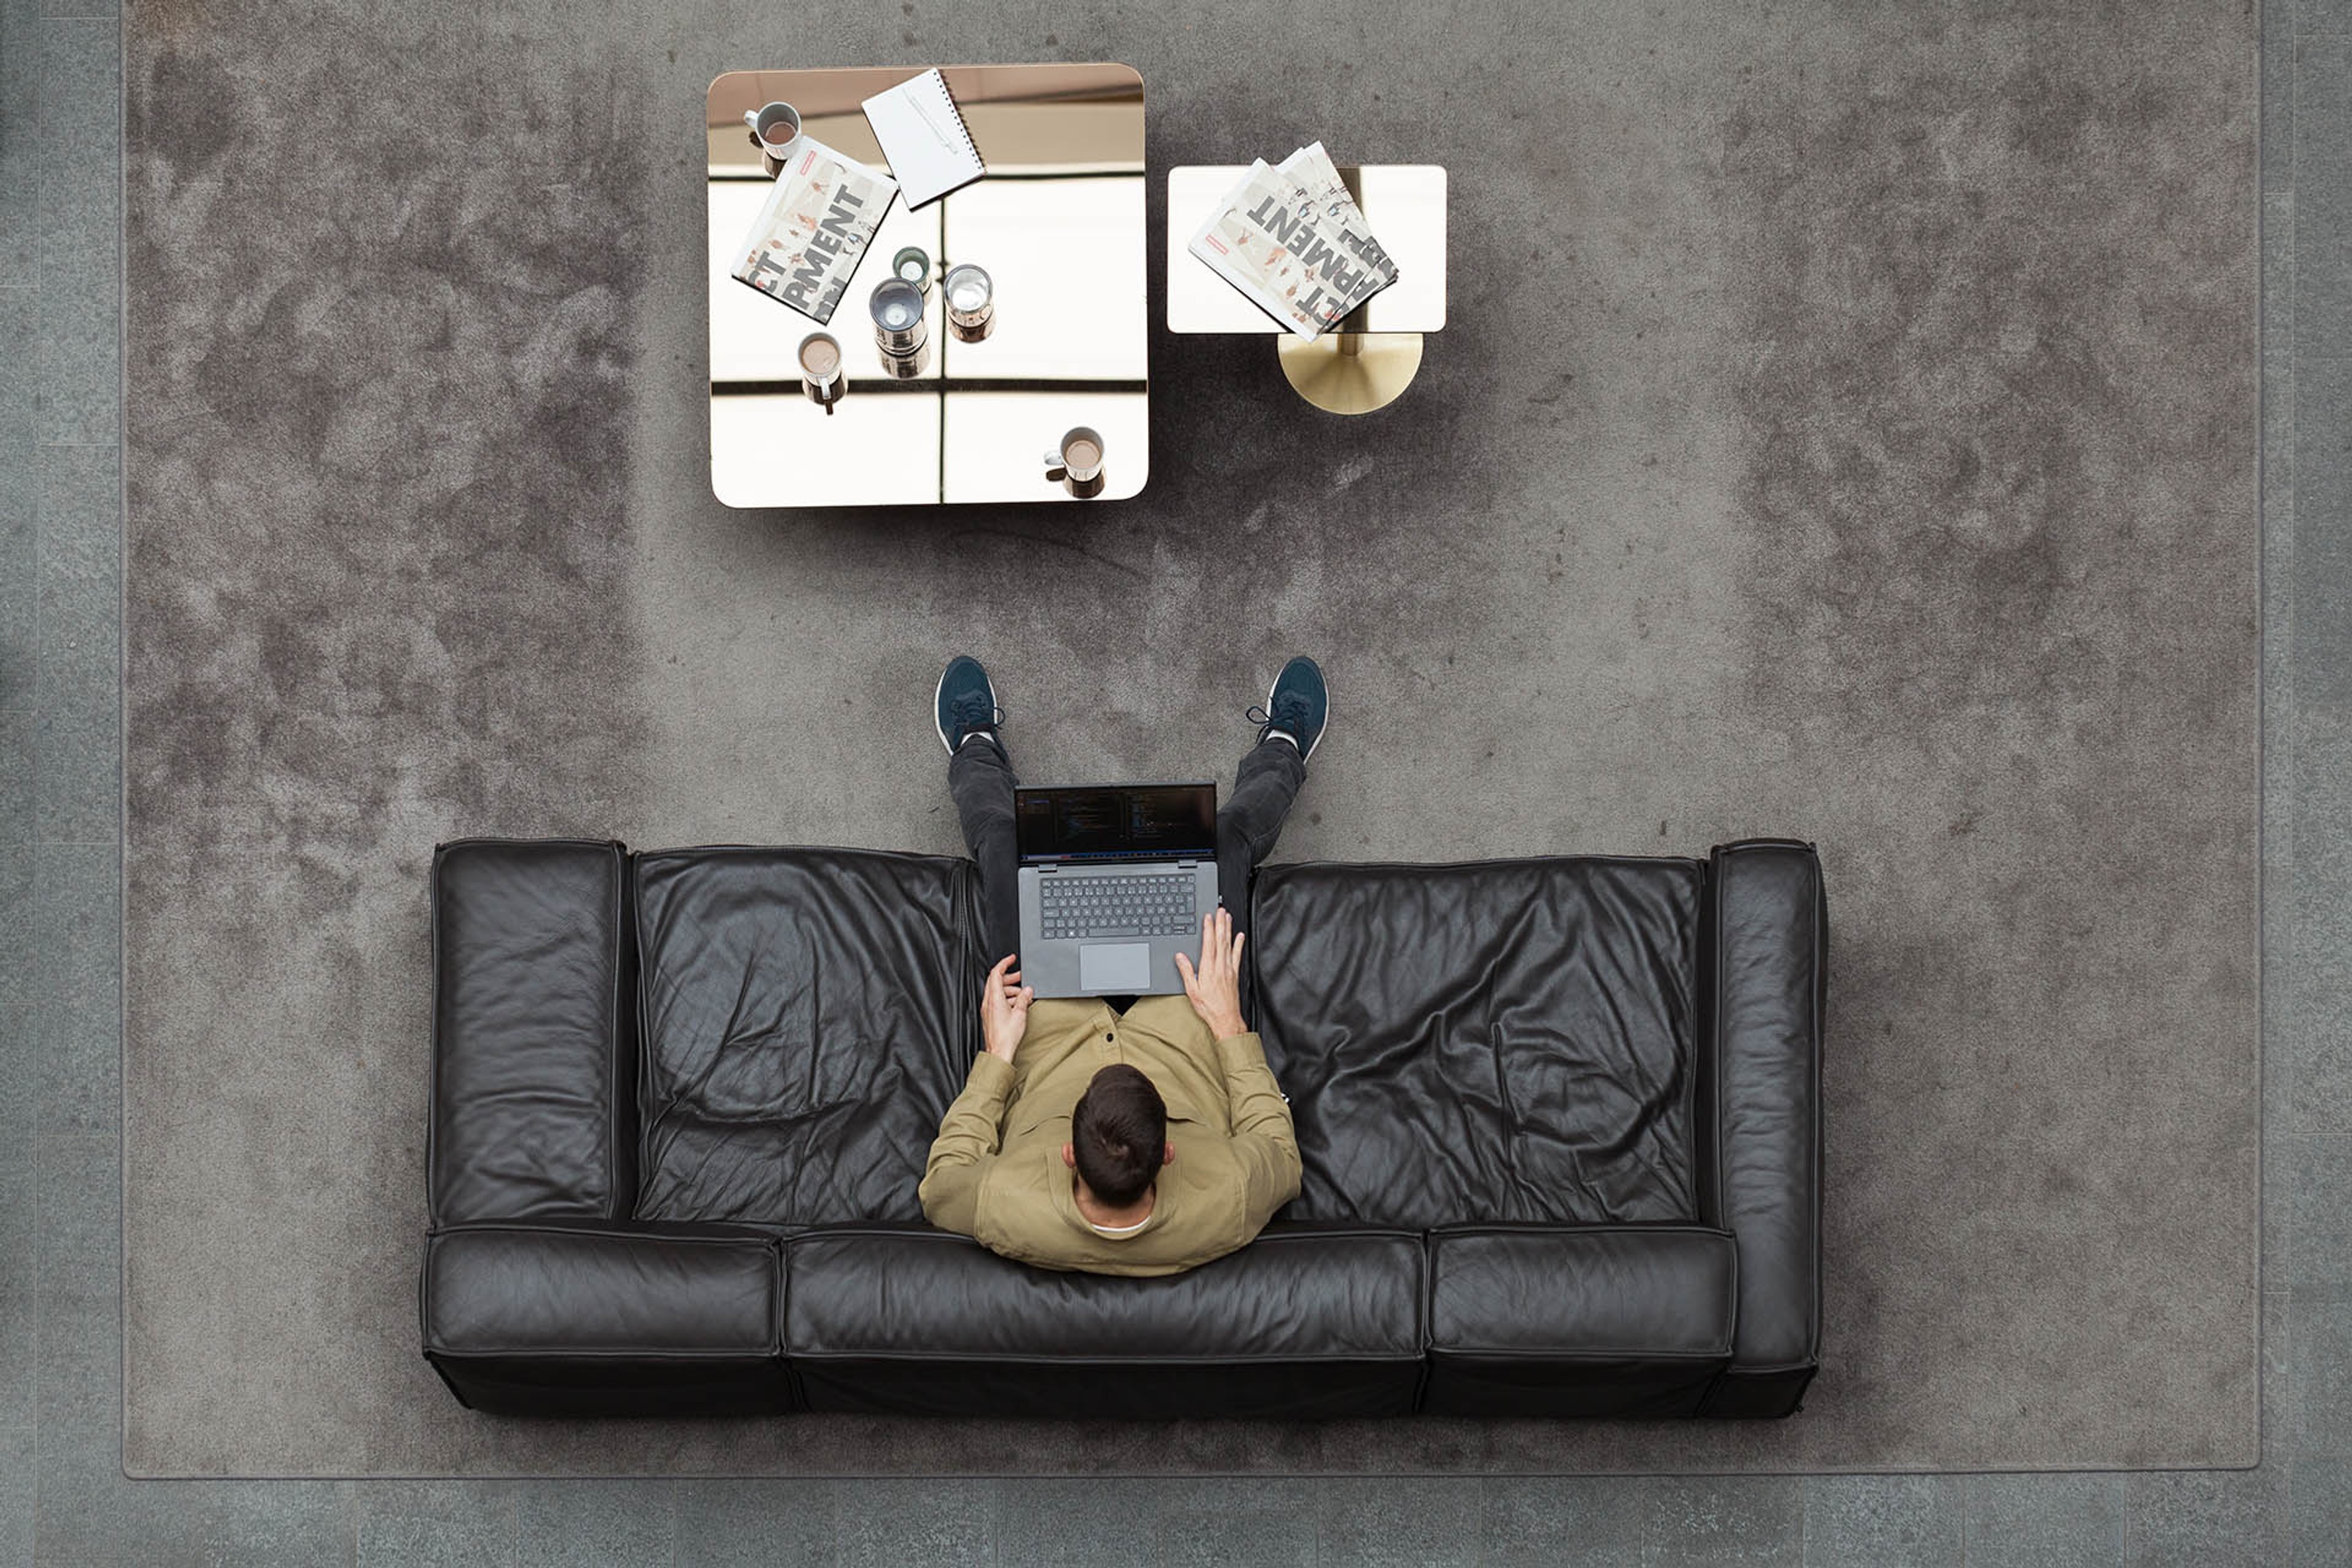 A man working on a laptop computer in a leather sofa photographed from above